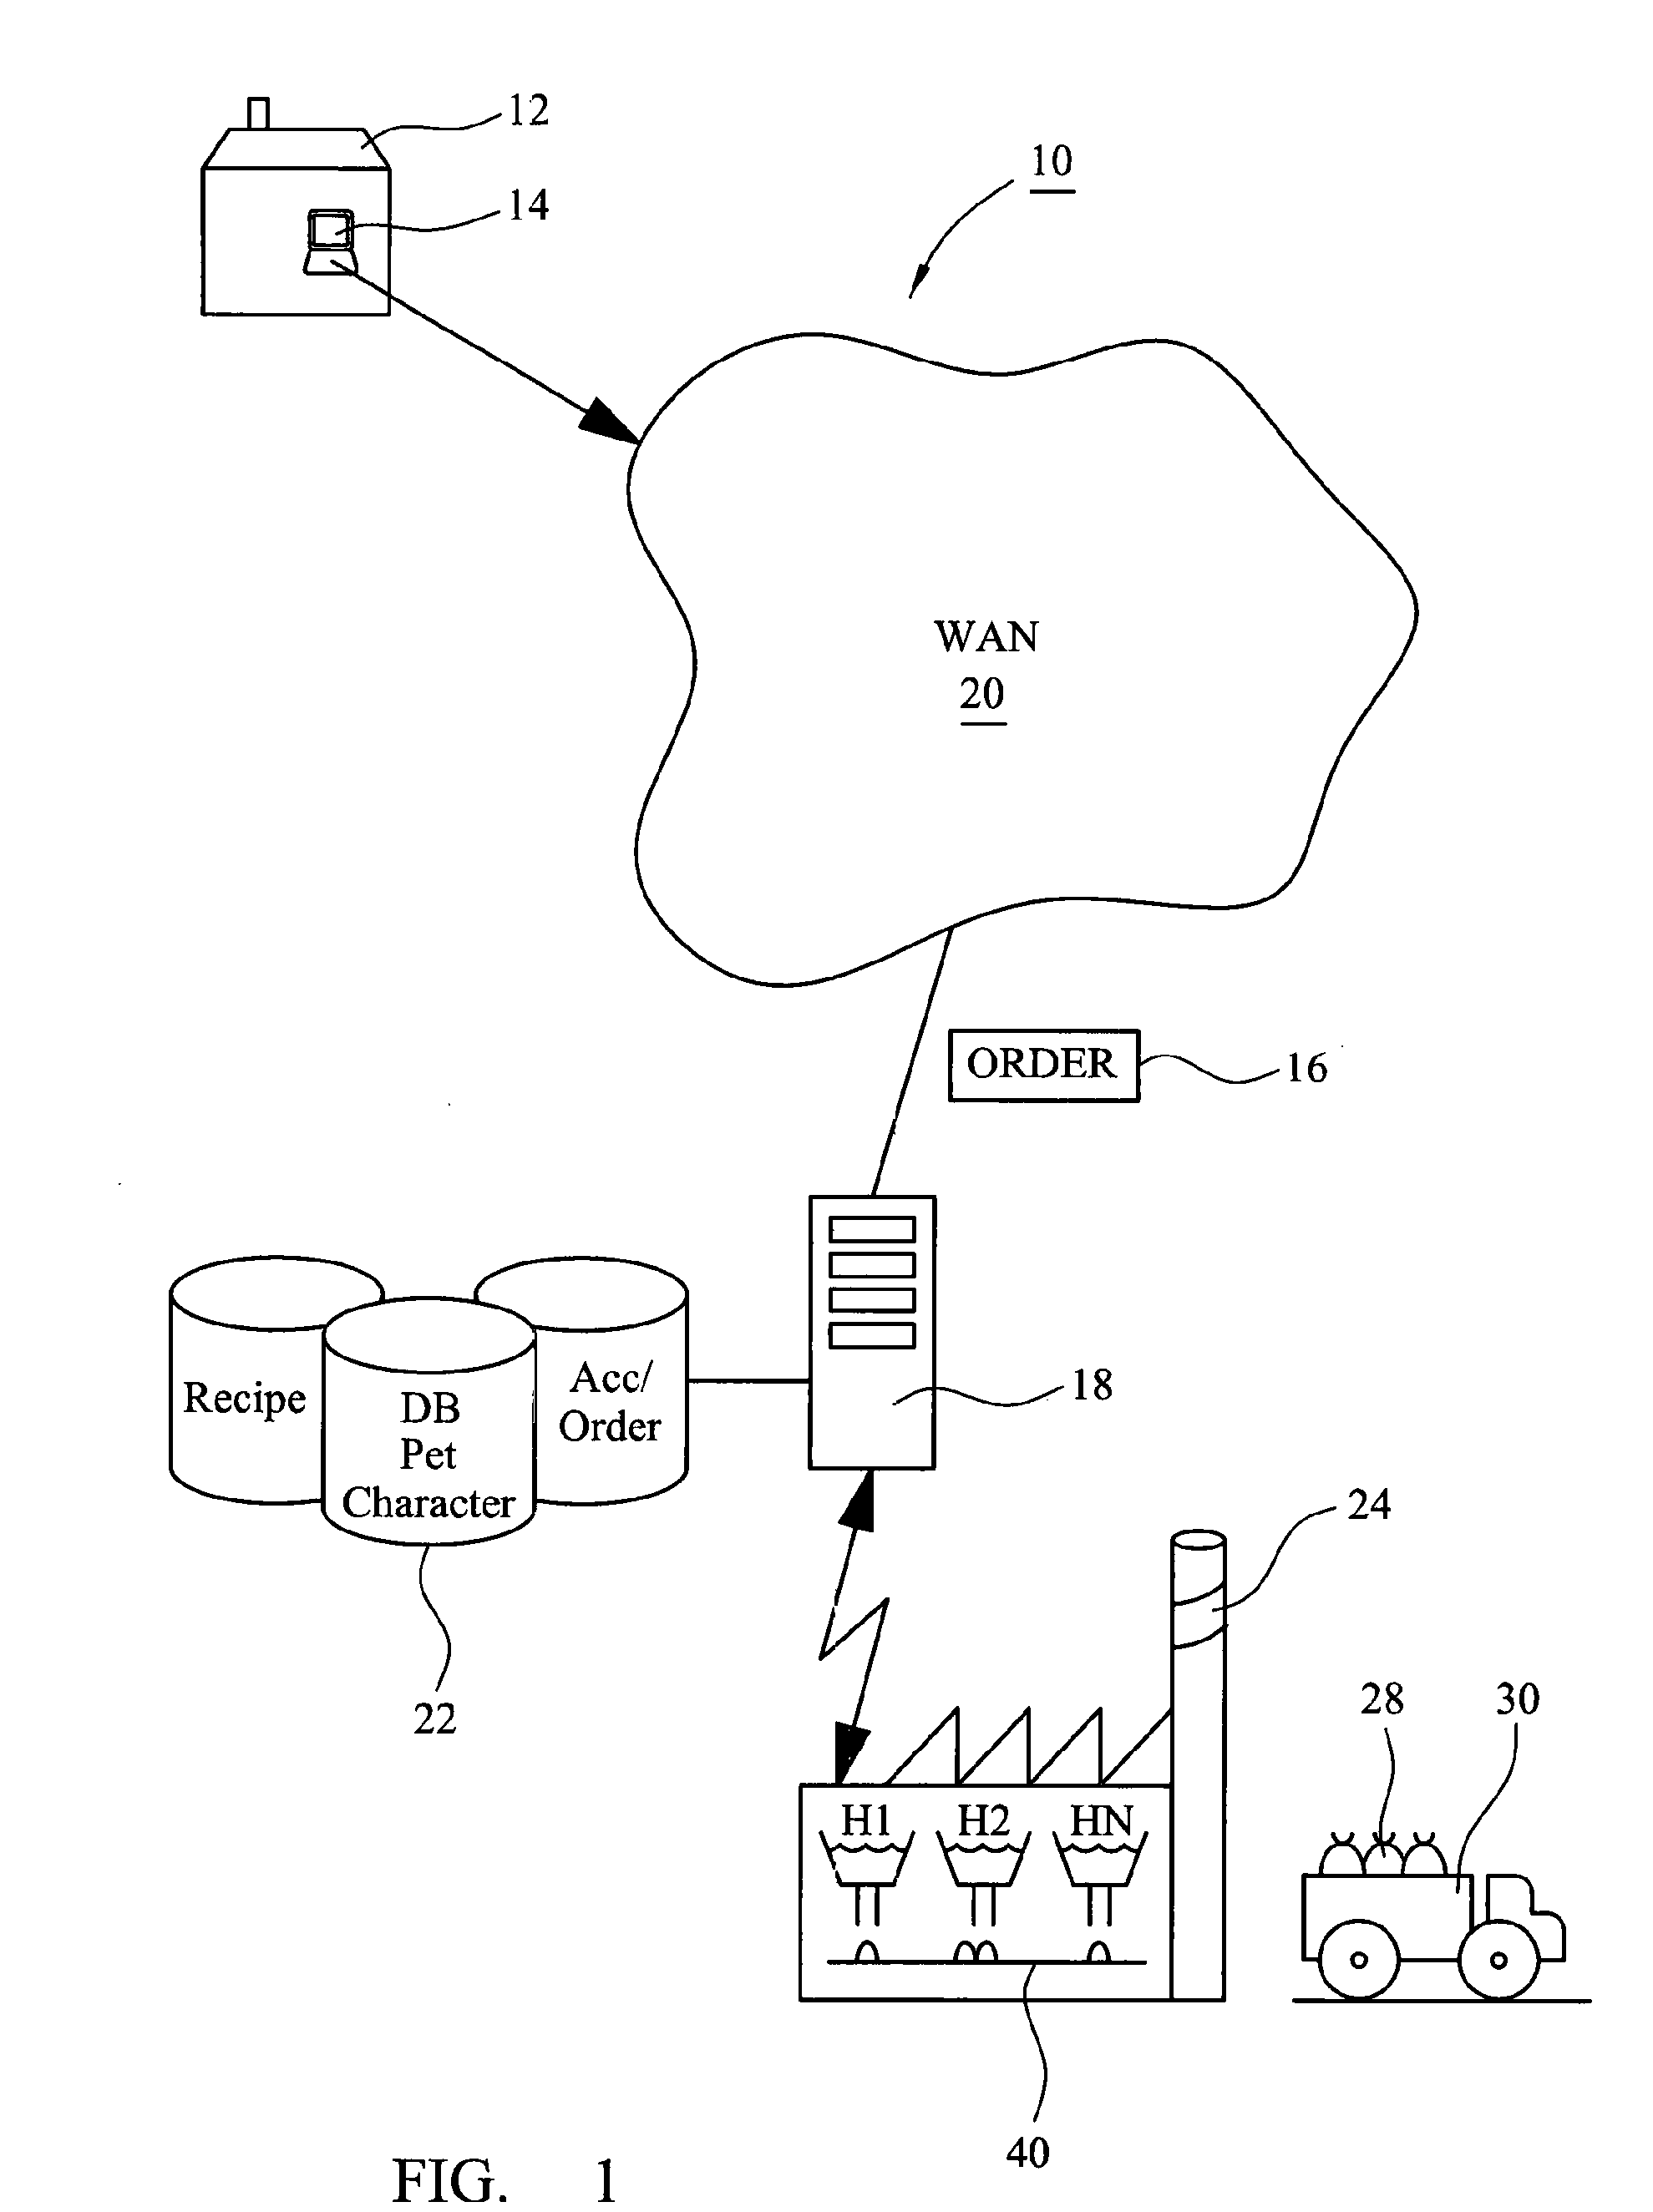 Breed-targeted ordering and delivery system